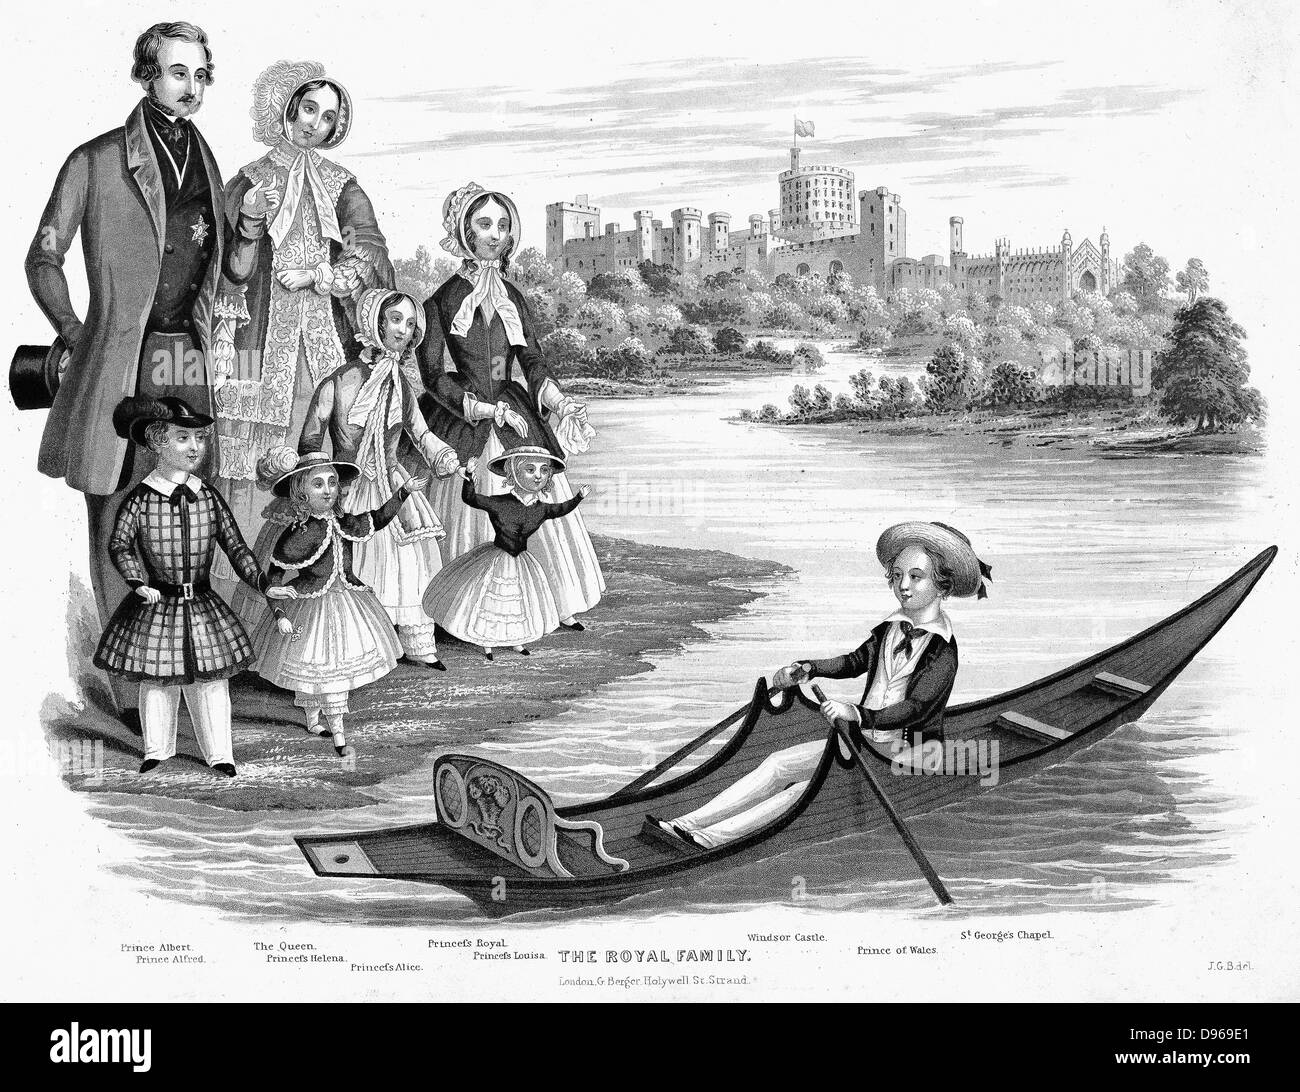 Queen Victoria and Prince Albert with their six eldest children: Louisa the youngest shown here, born 1848. In boat is Prince of Wales (later Edward VII)  Aquatint c1850 Stock Photo